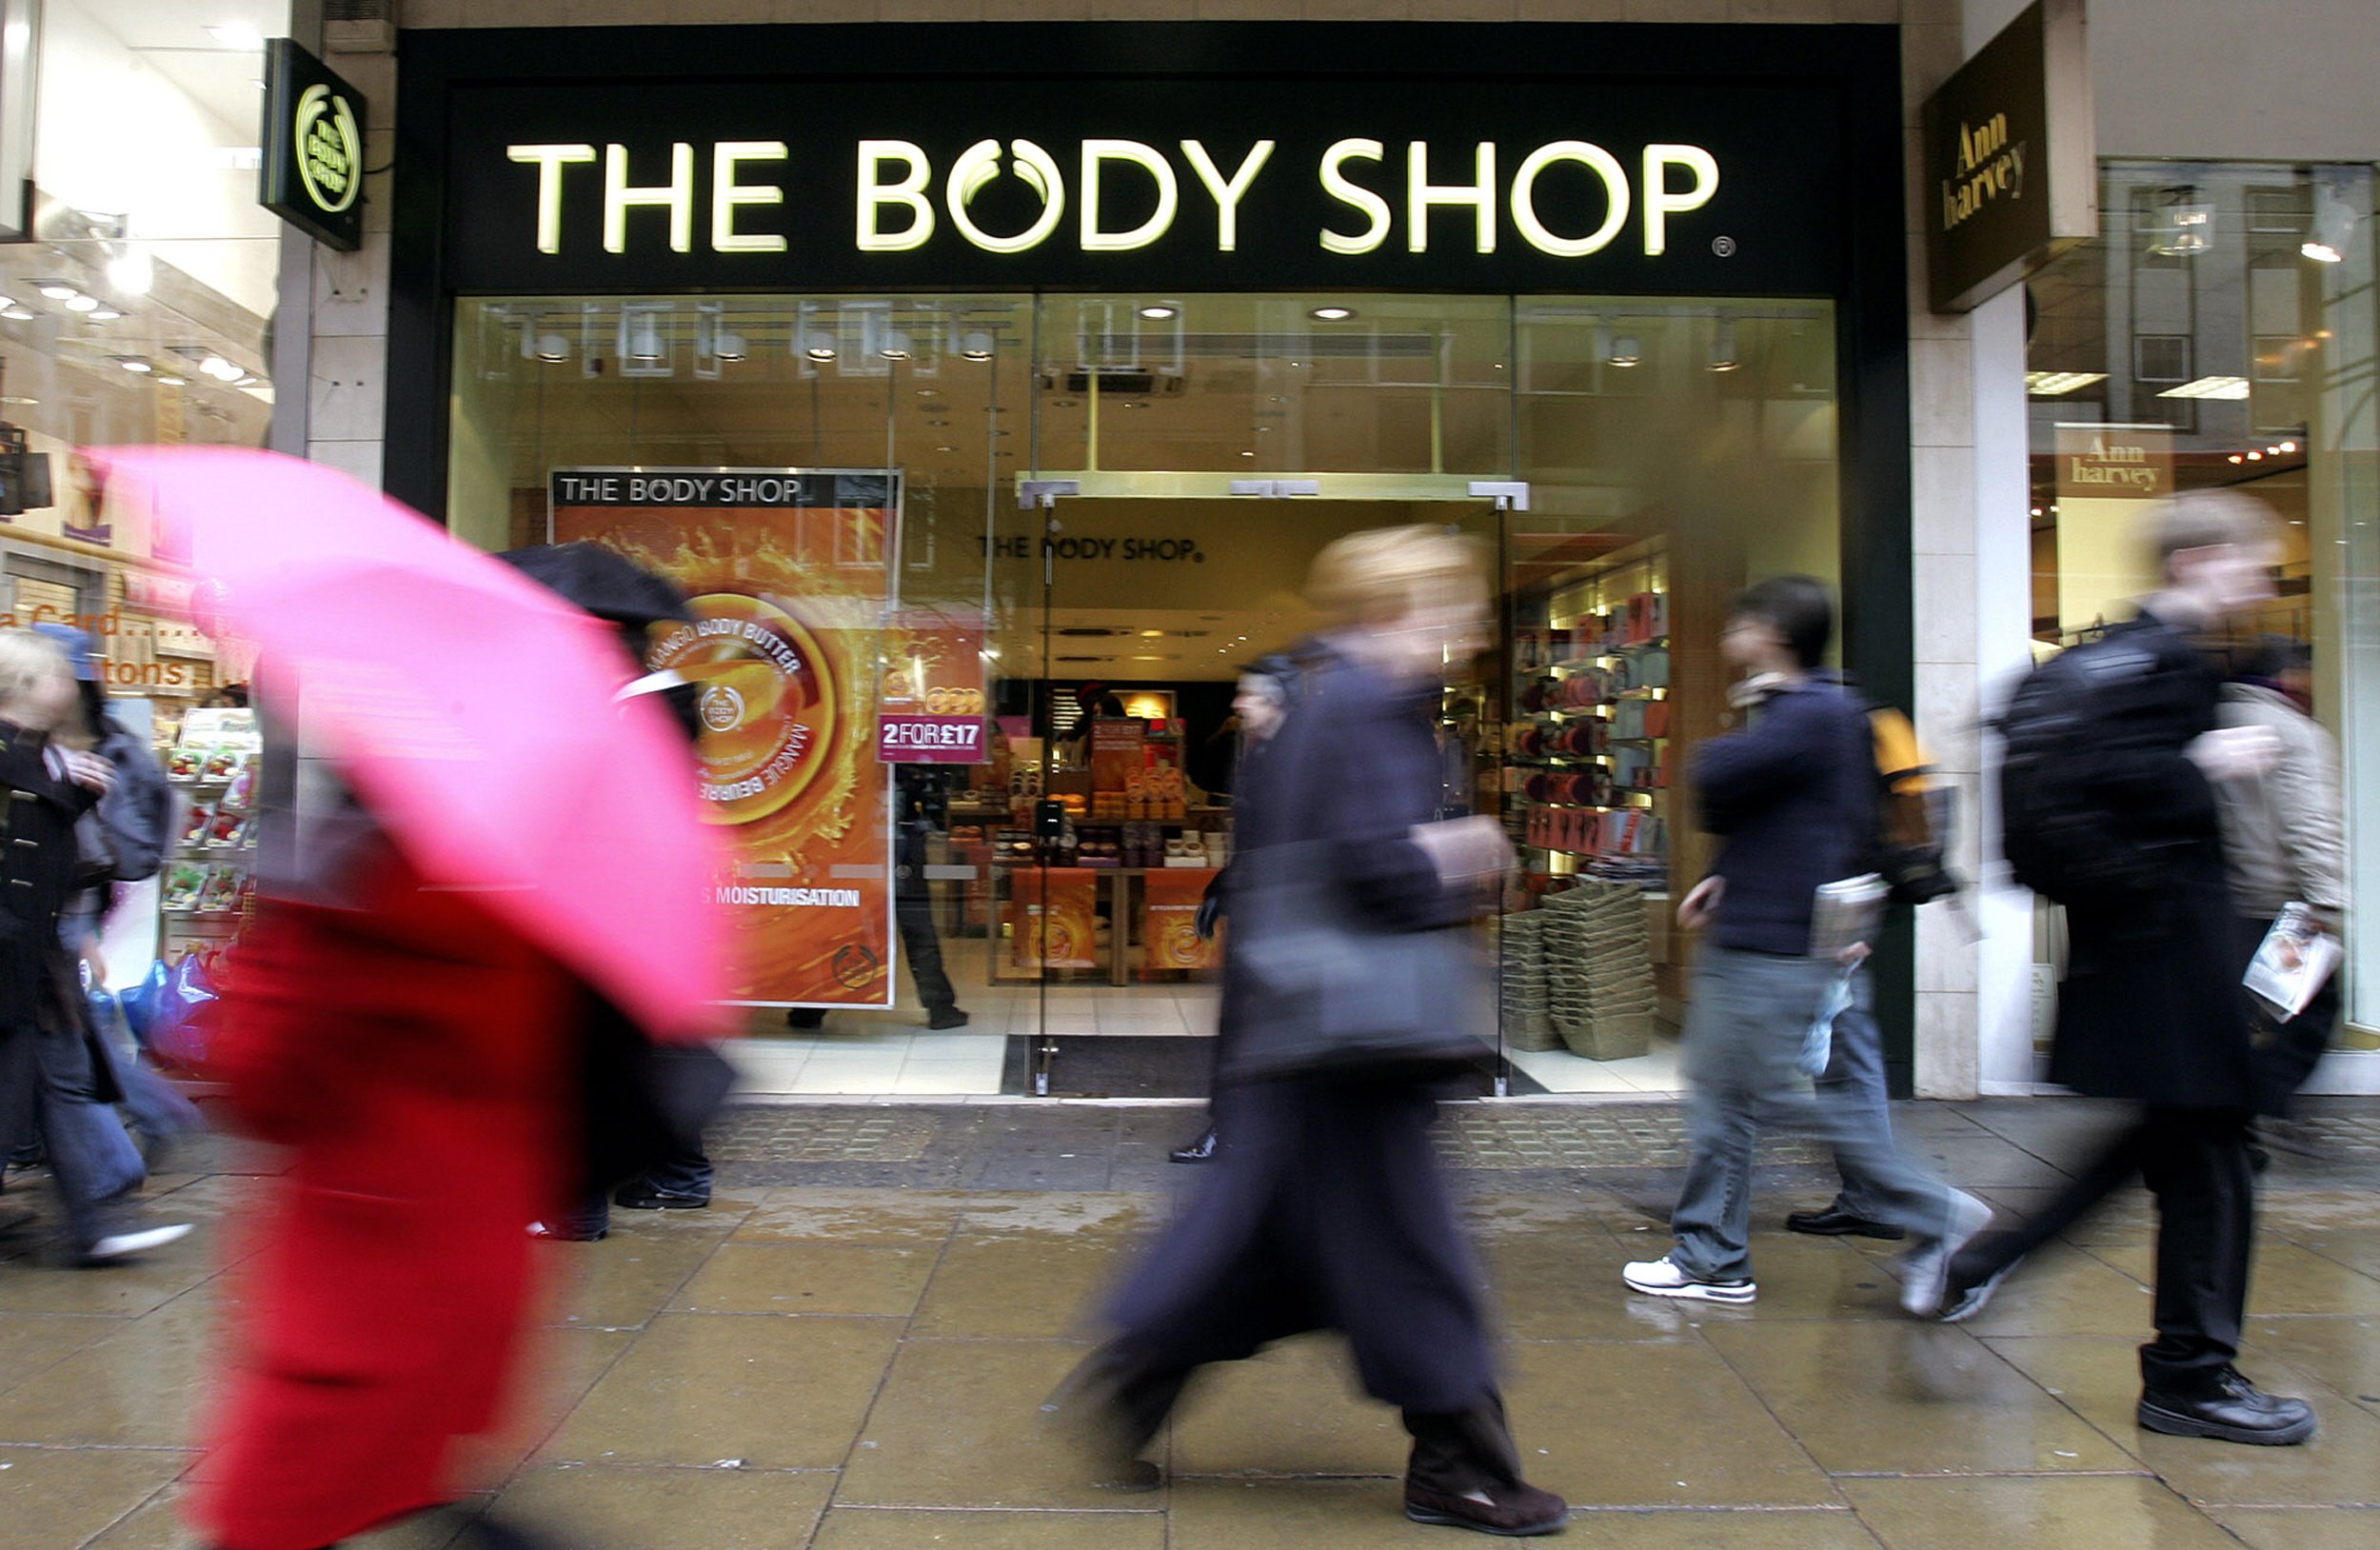 The Body Shop has become a go-to for all natural beauty lovers